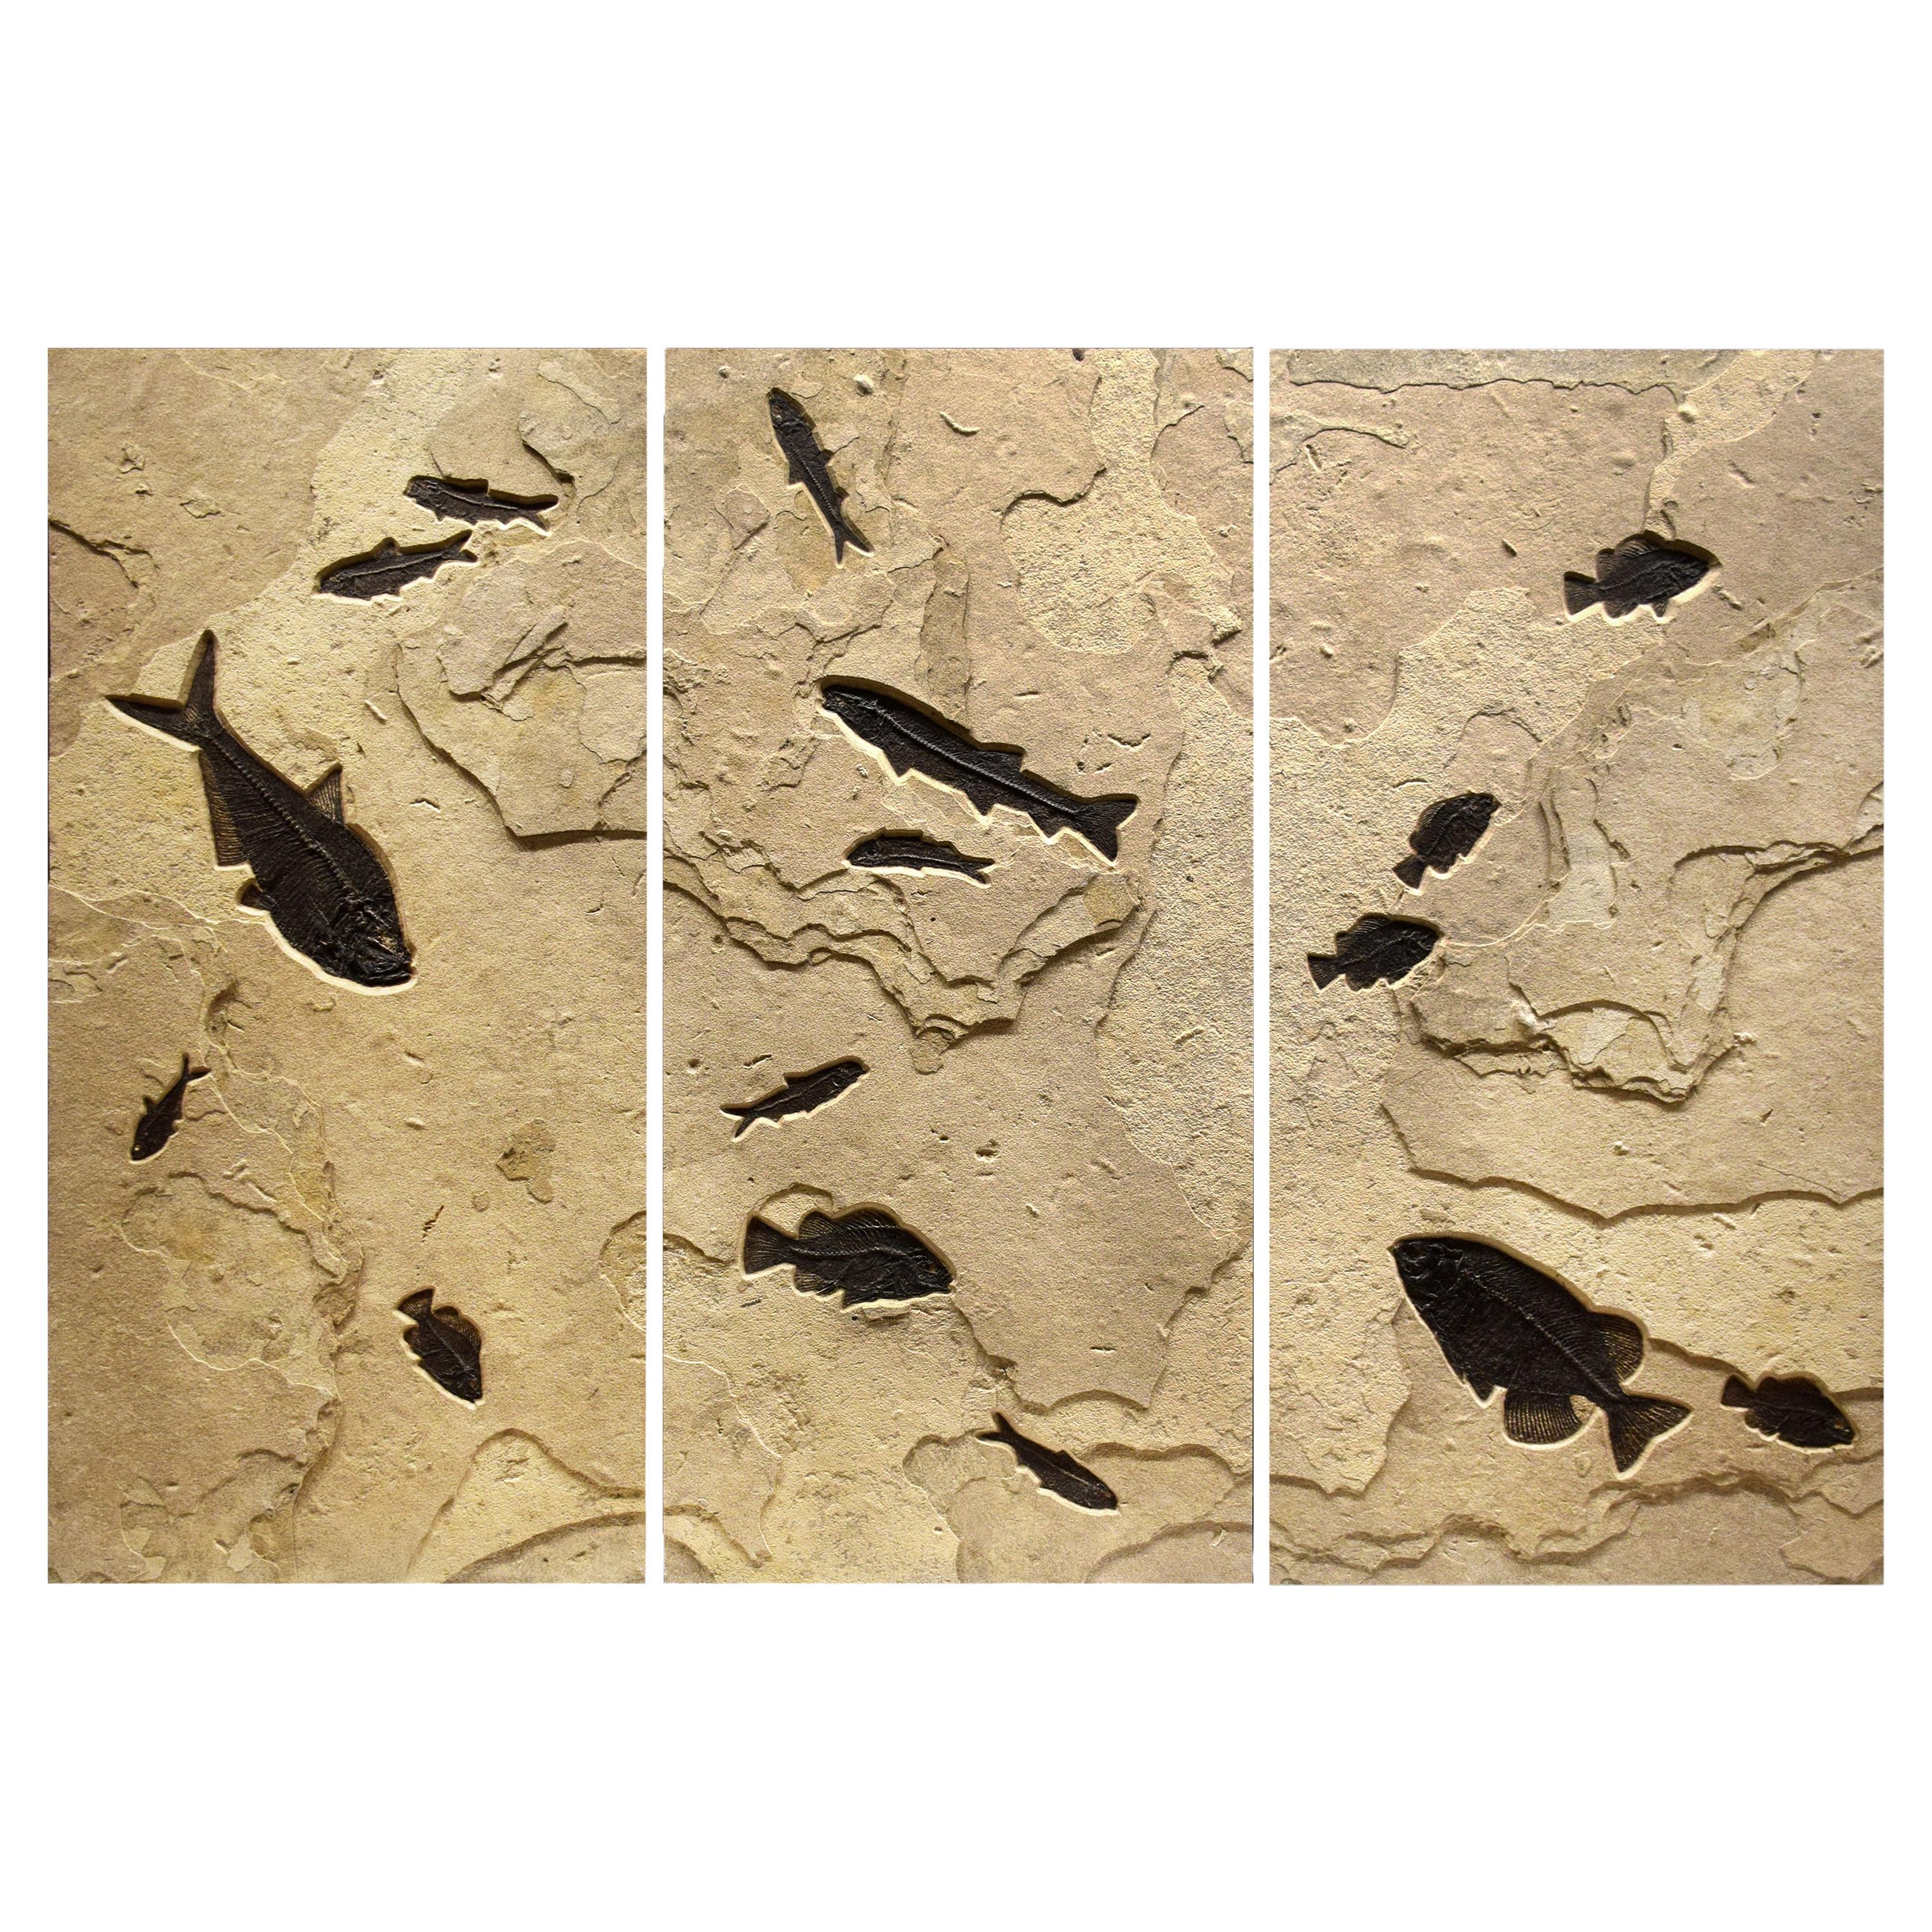 50 Million Year Old Eocene Fossil Fish Triptych, Green River Formation, Wyoming